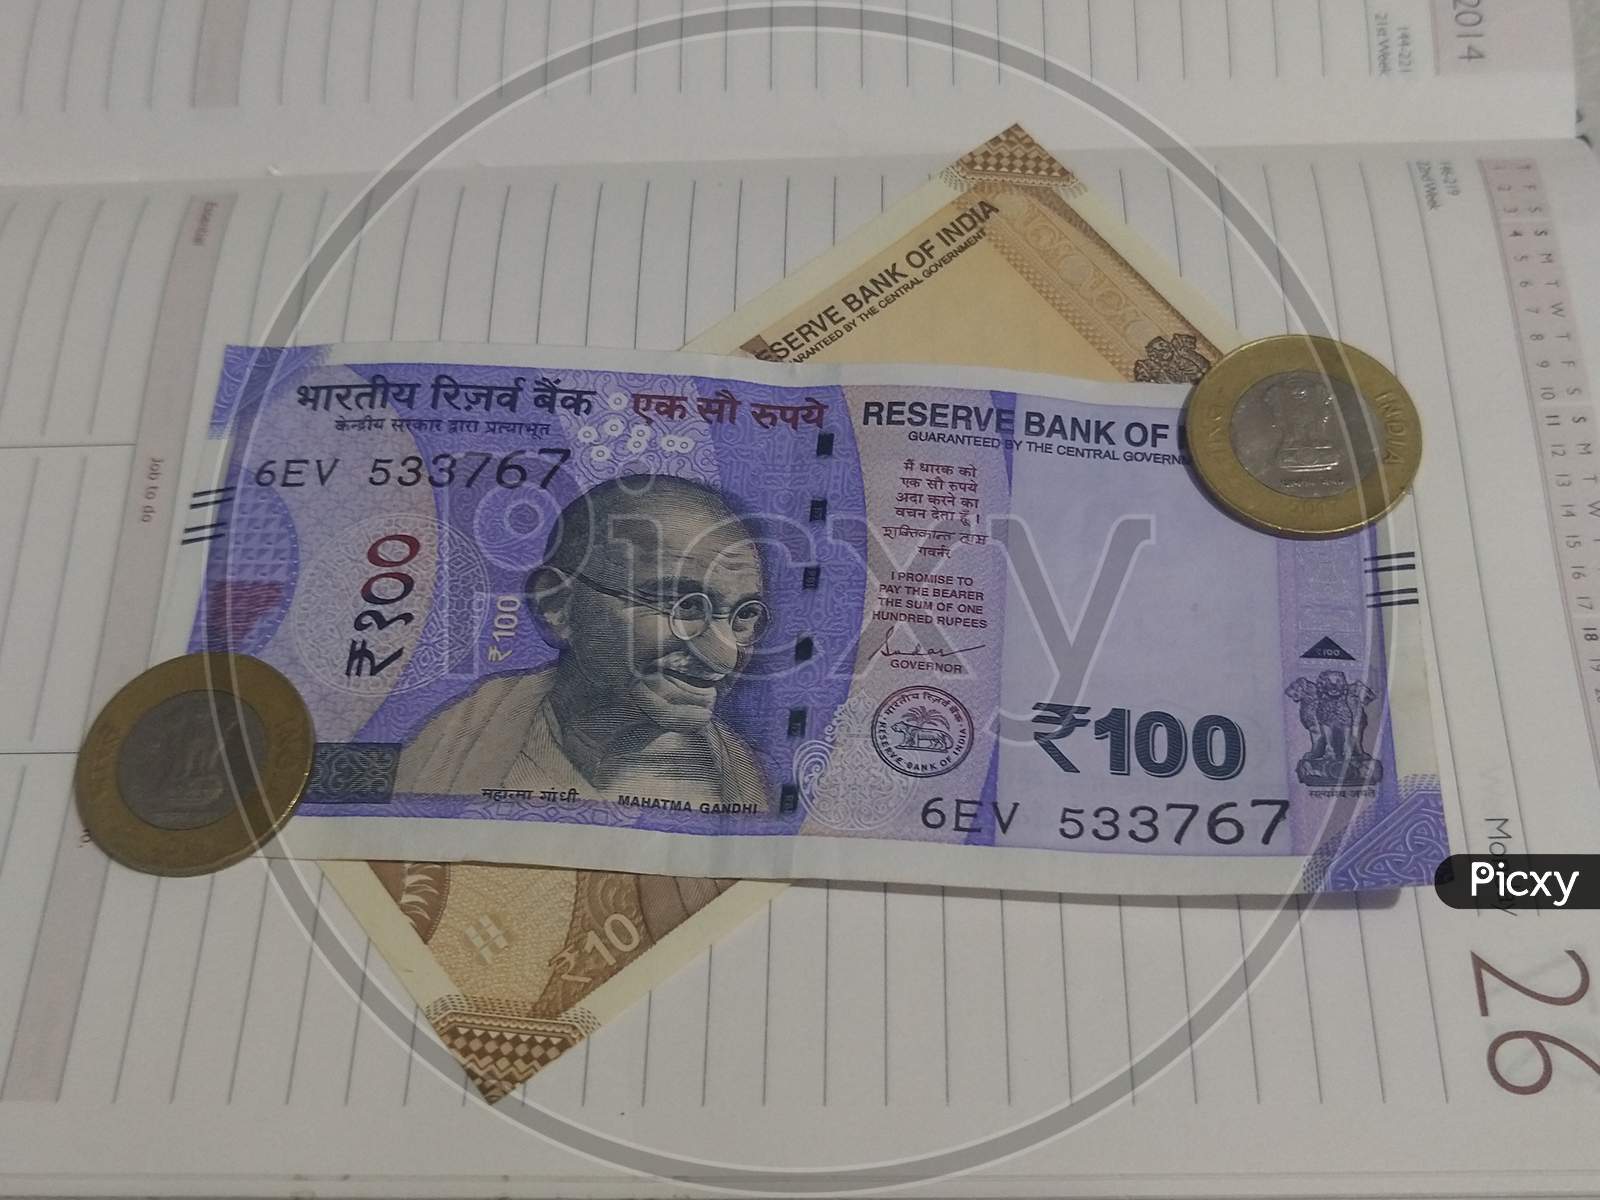 The Indian currency on opened page of diary.